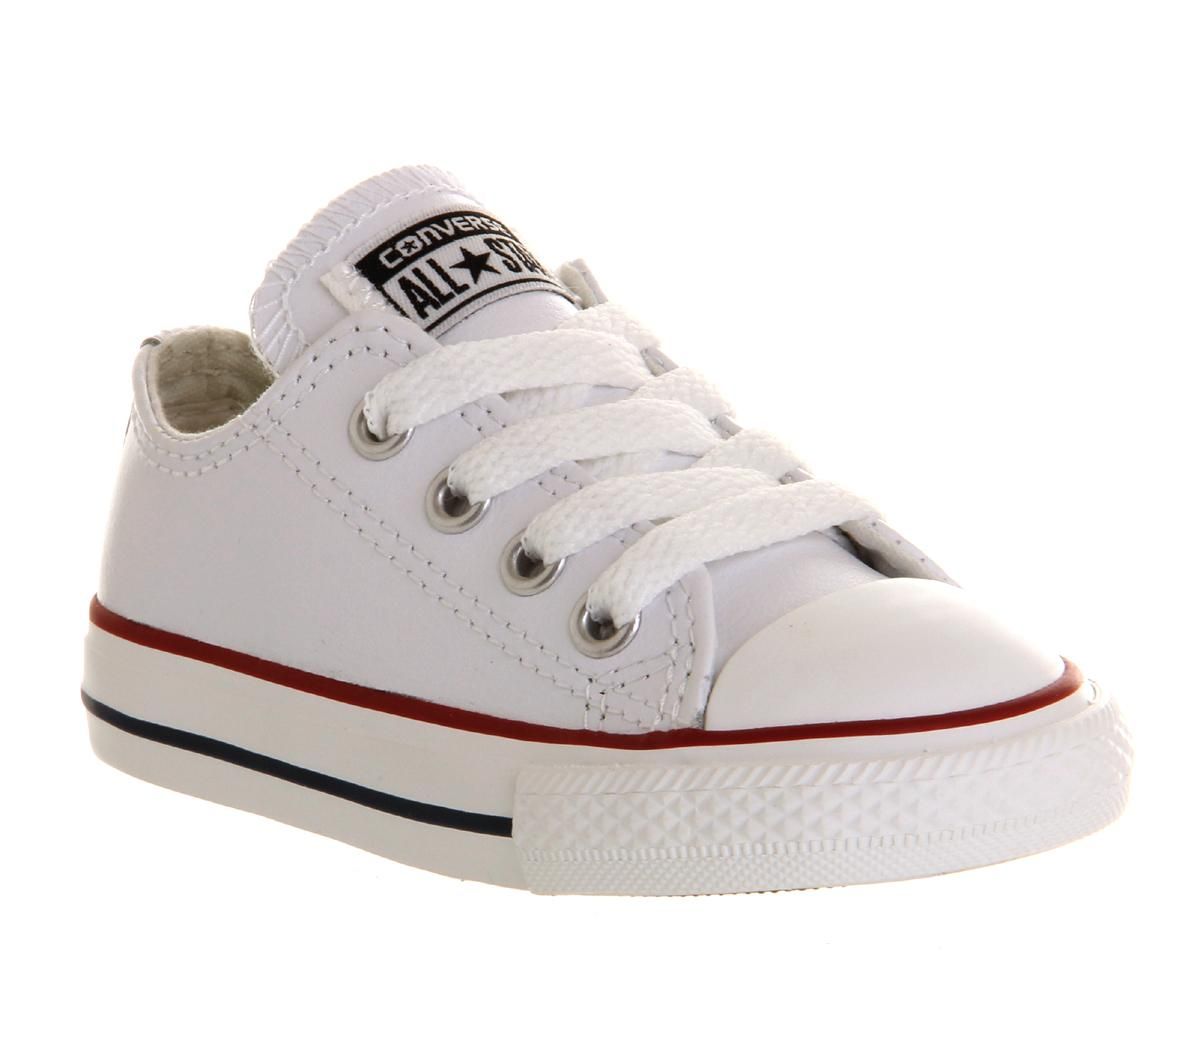 converse all star 2vlace optical white leather